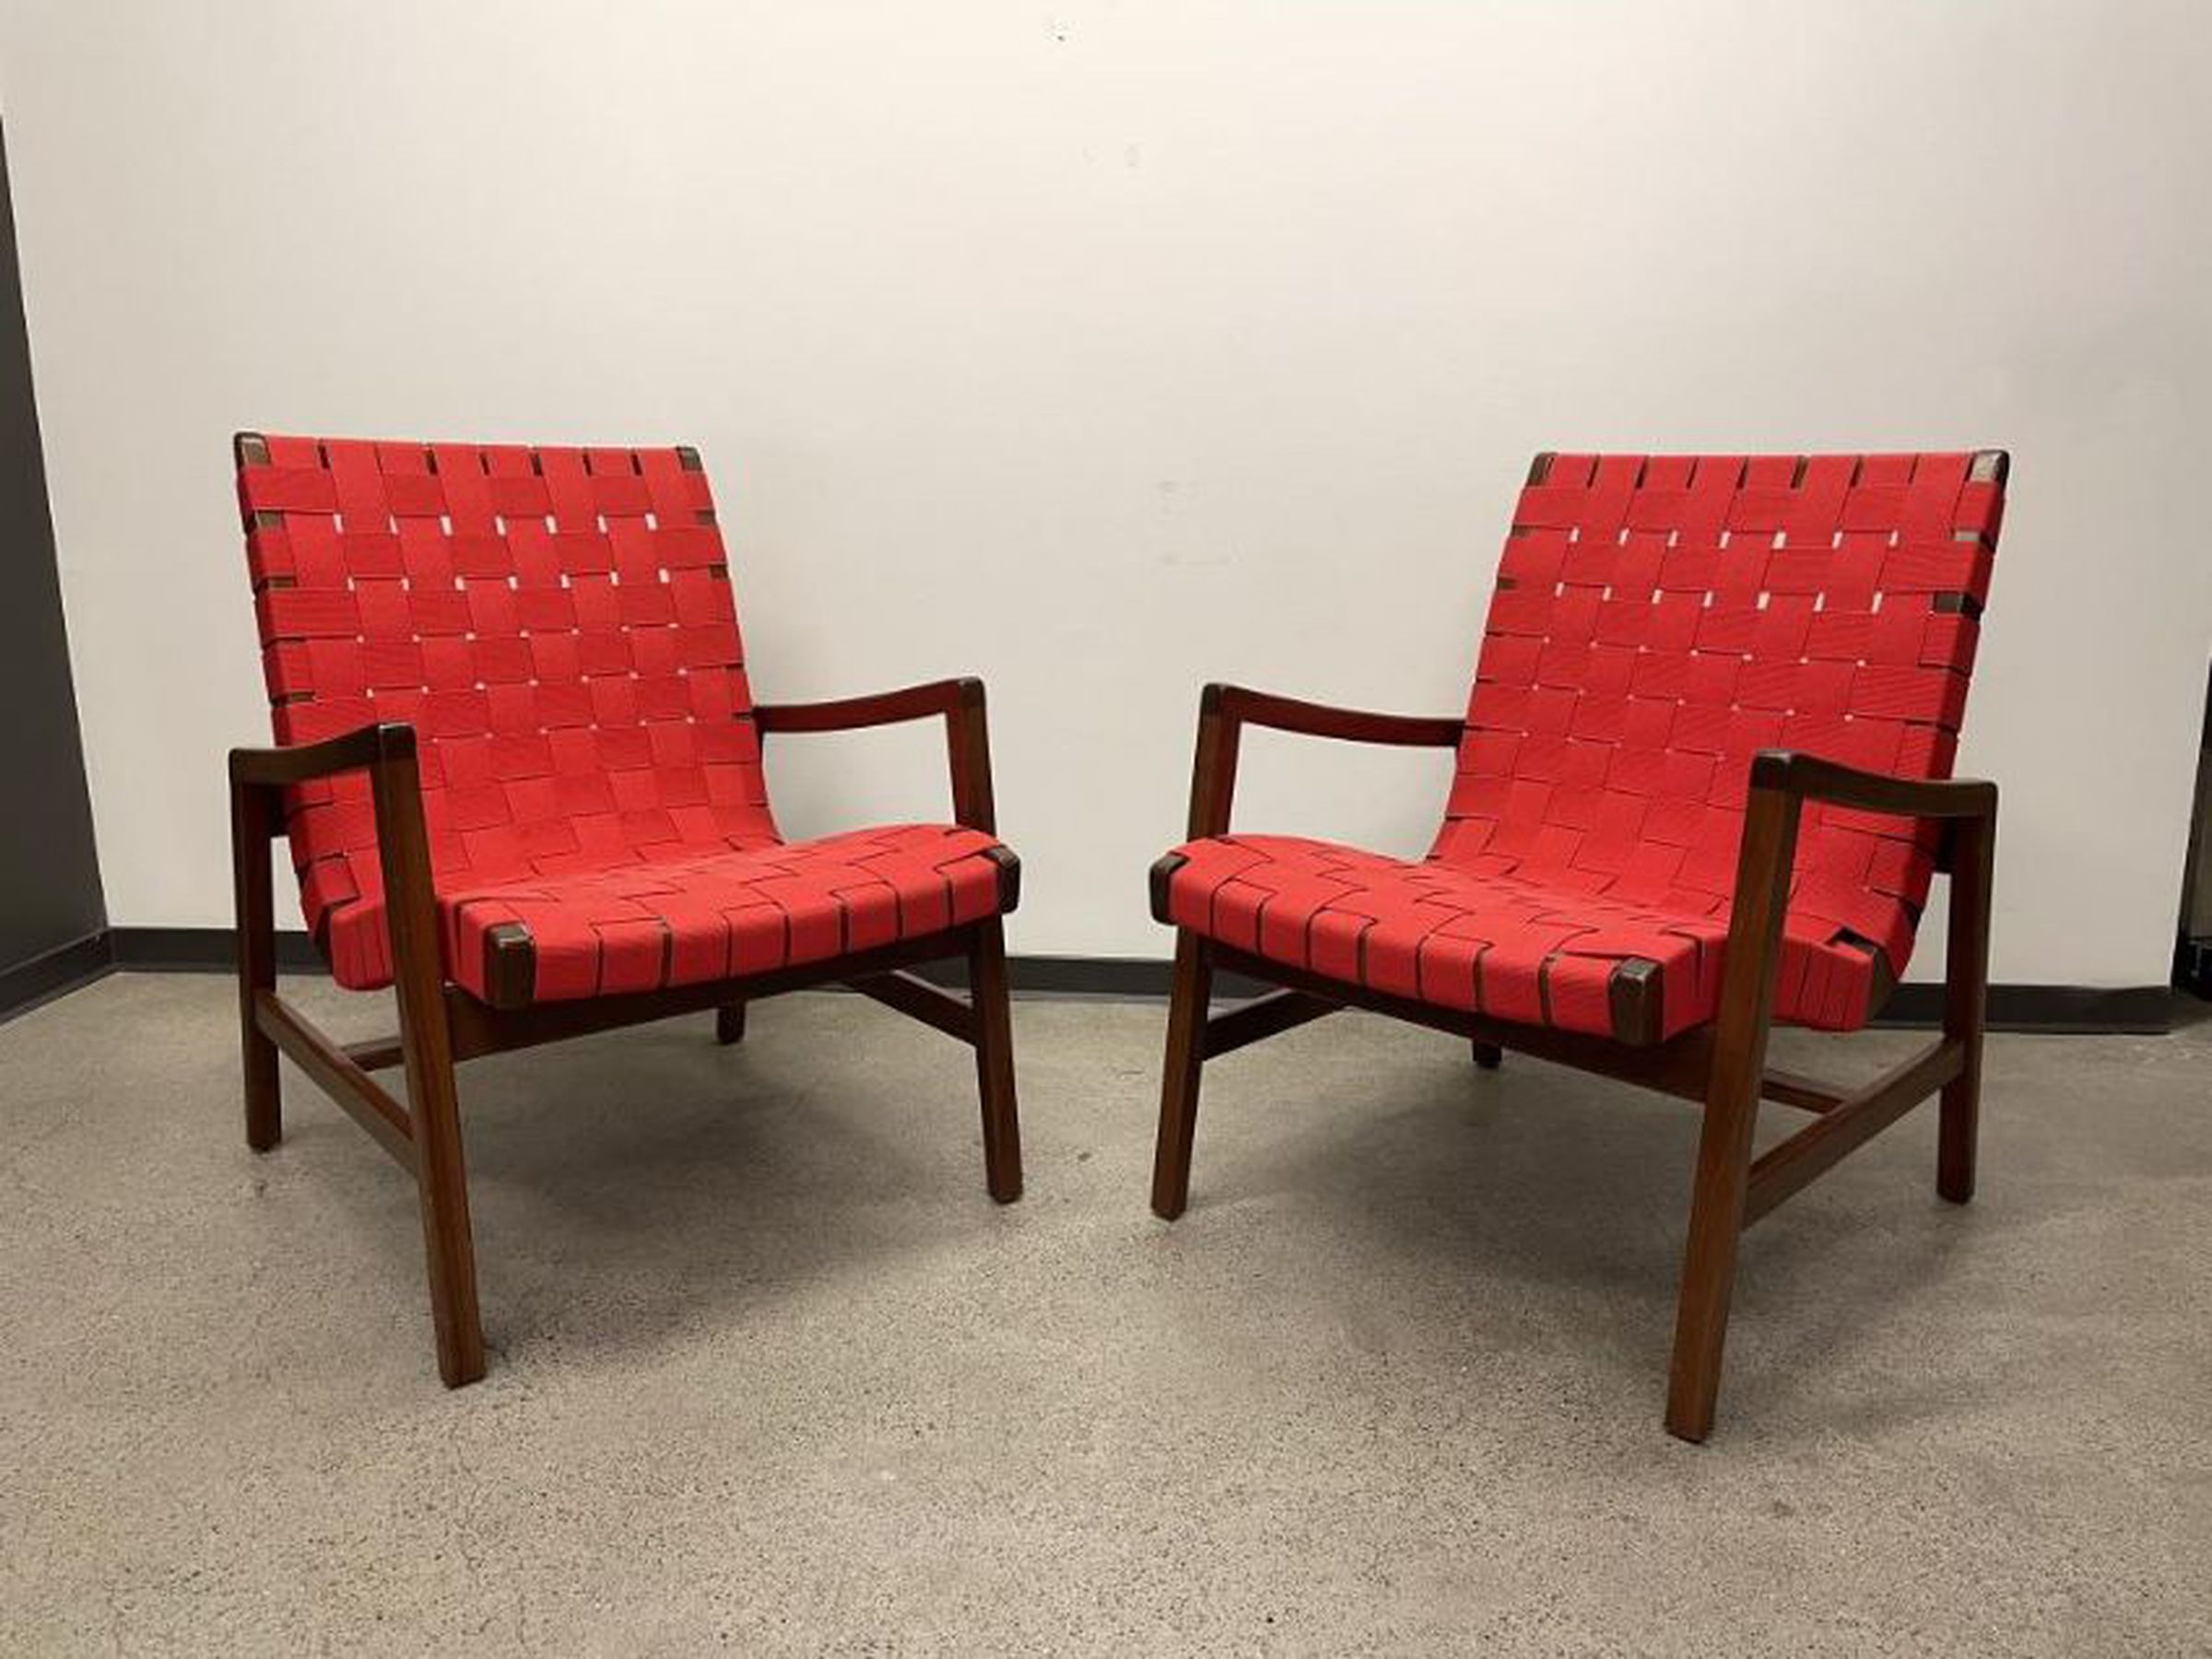 Two Knoll Studio Risom lounge chair in red